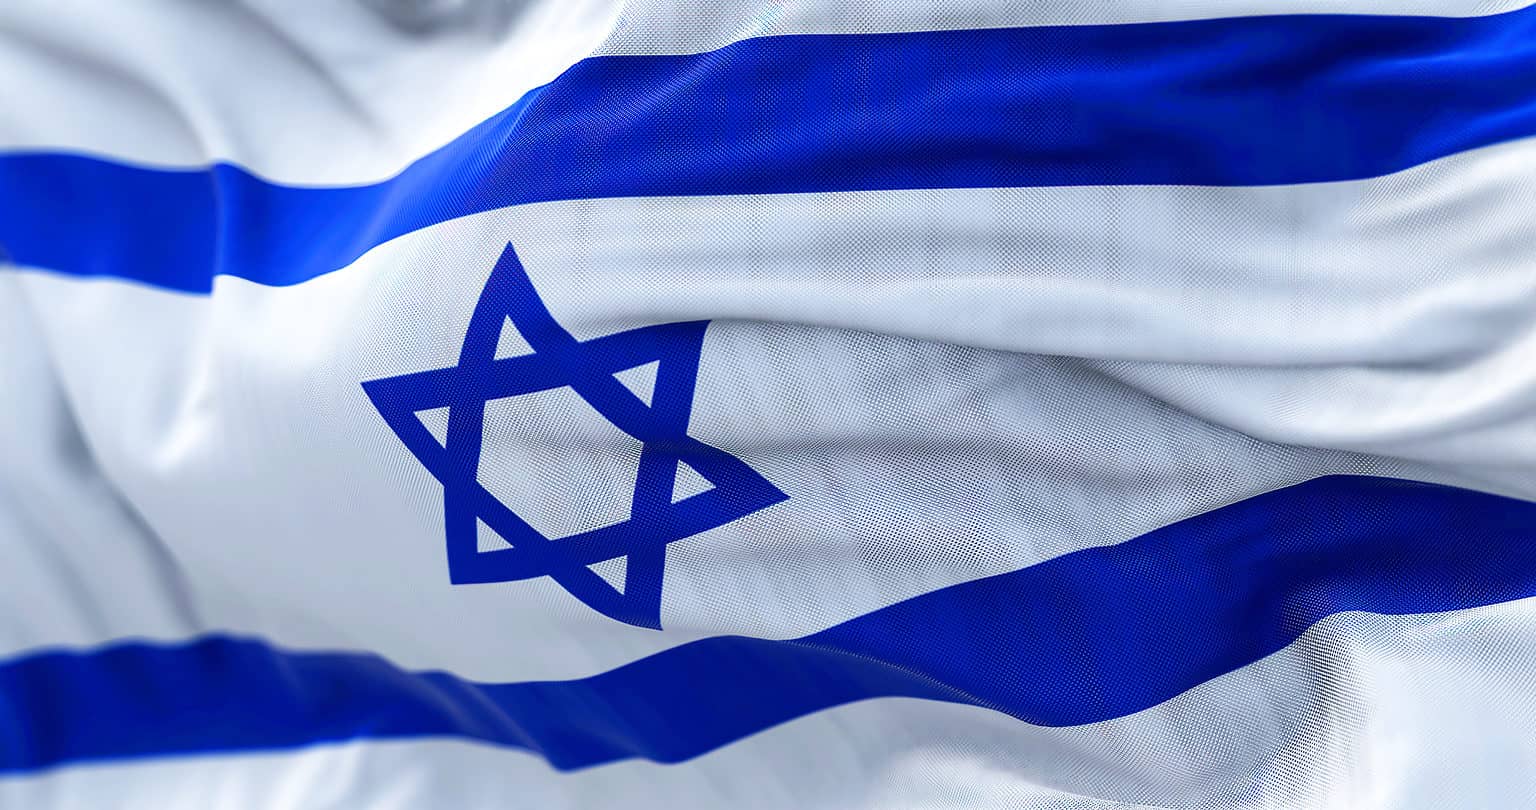 The Flag of Israel: History, Meaning, and Symbolism - A-Z Animals